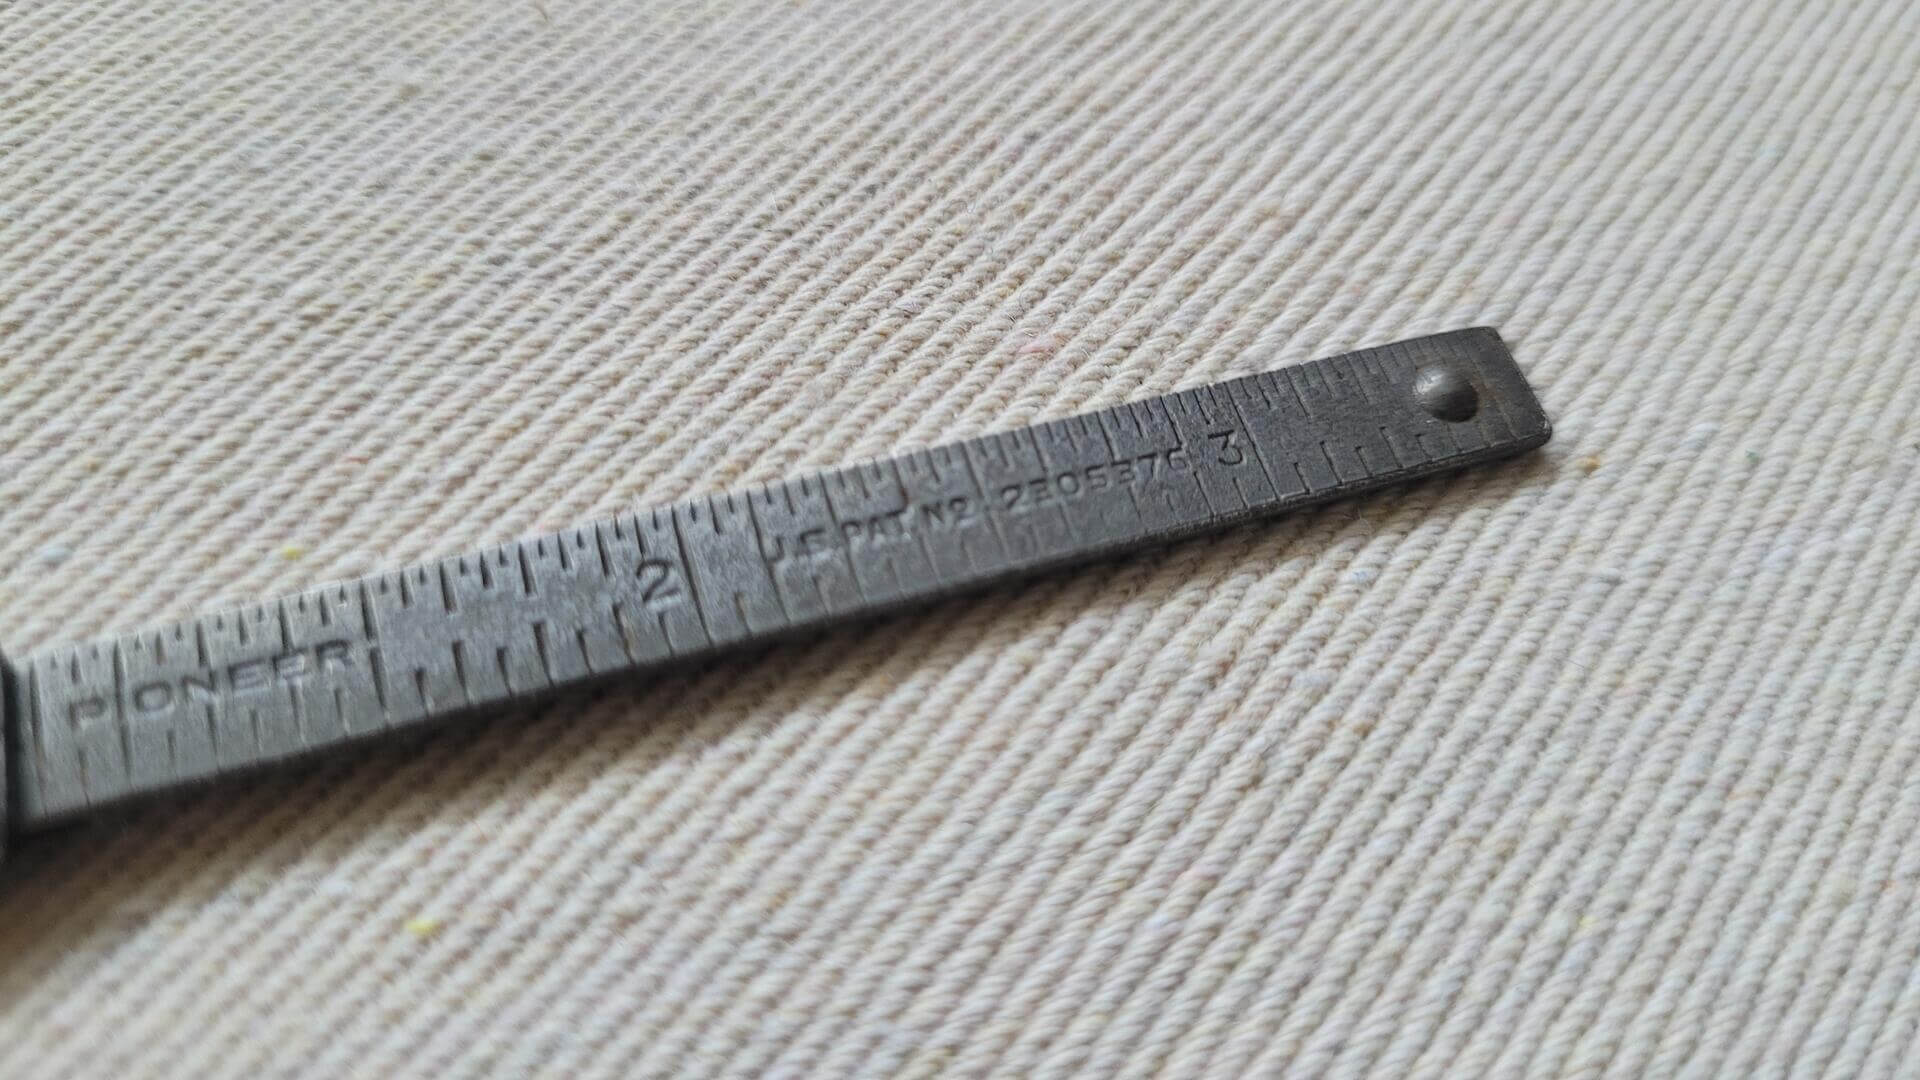 Rare Pioneer Four Inches Mini Pocket Slide Caliper Made in USA - Machinist / Mechanic Marking and Measuring Vintage Collectible Tools